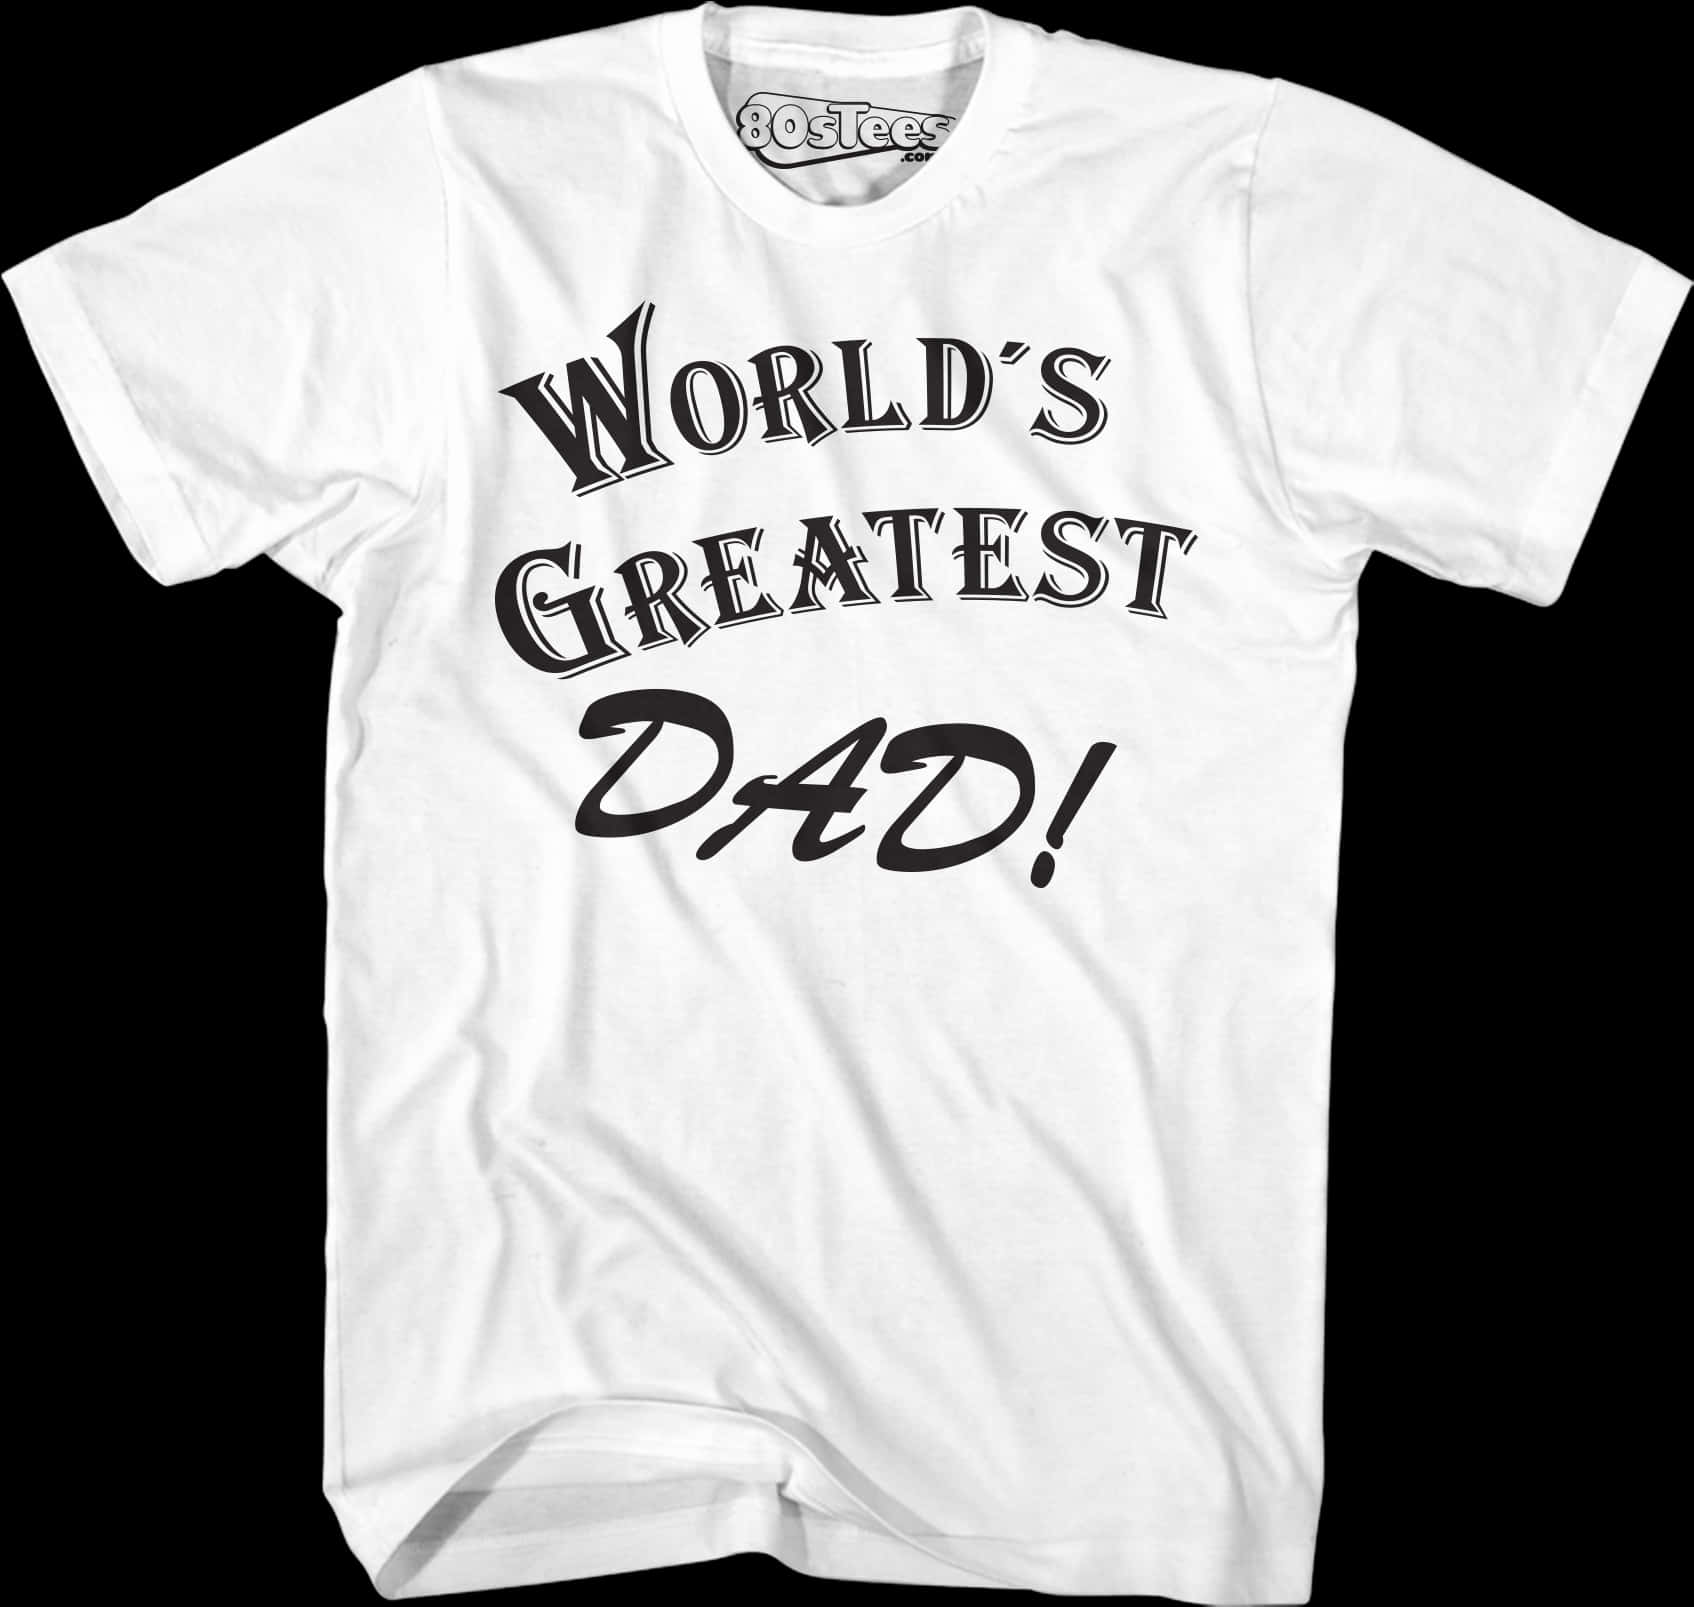 Worlds Greatest Dad White T Shirt PNG image